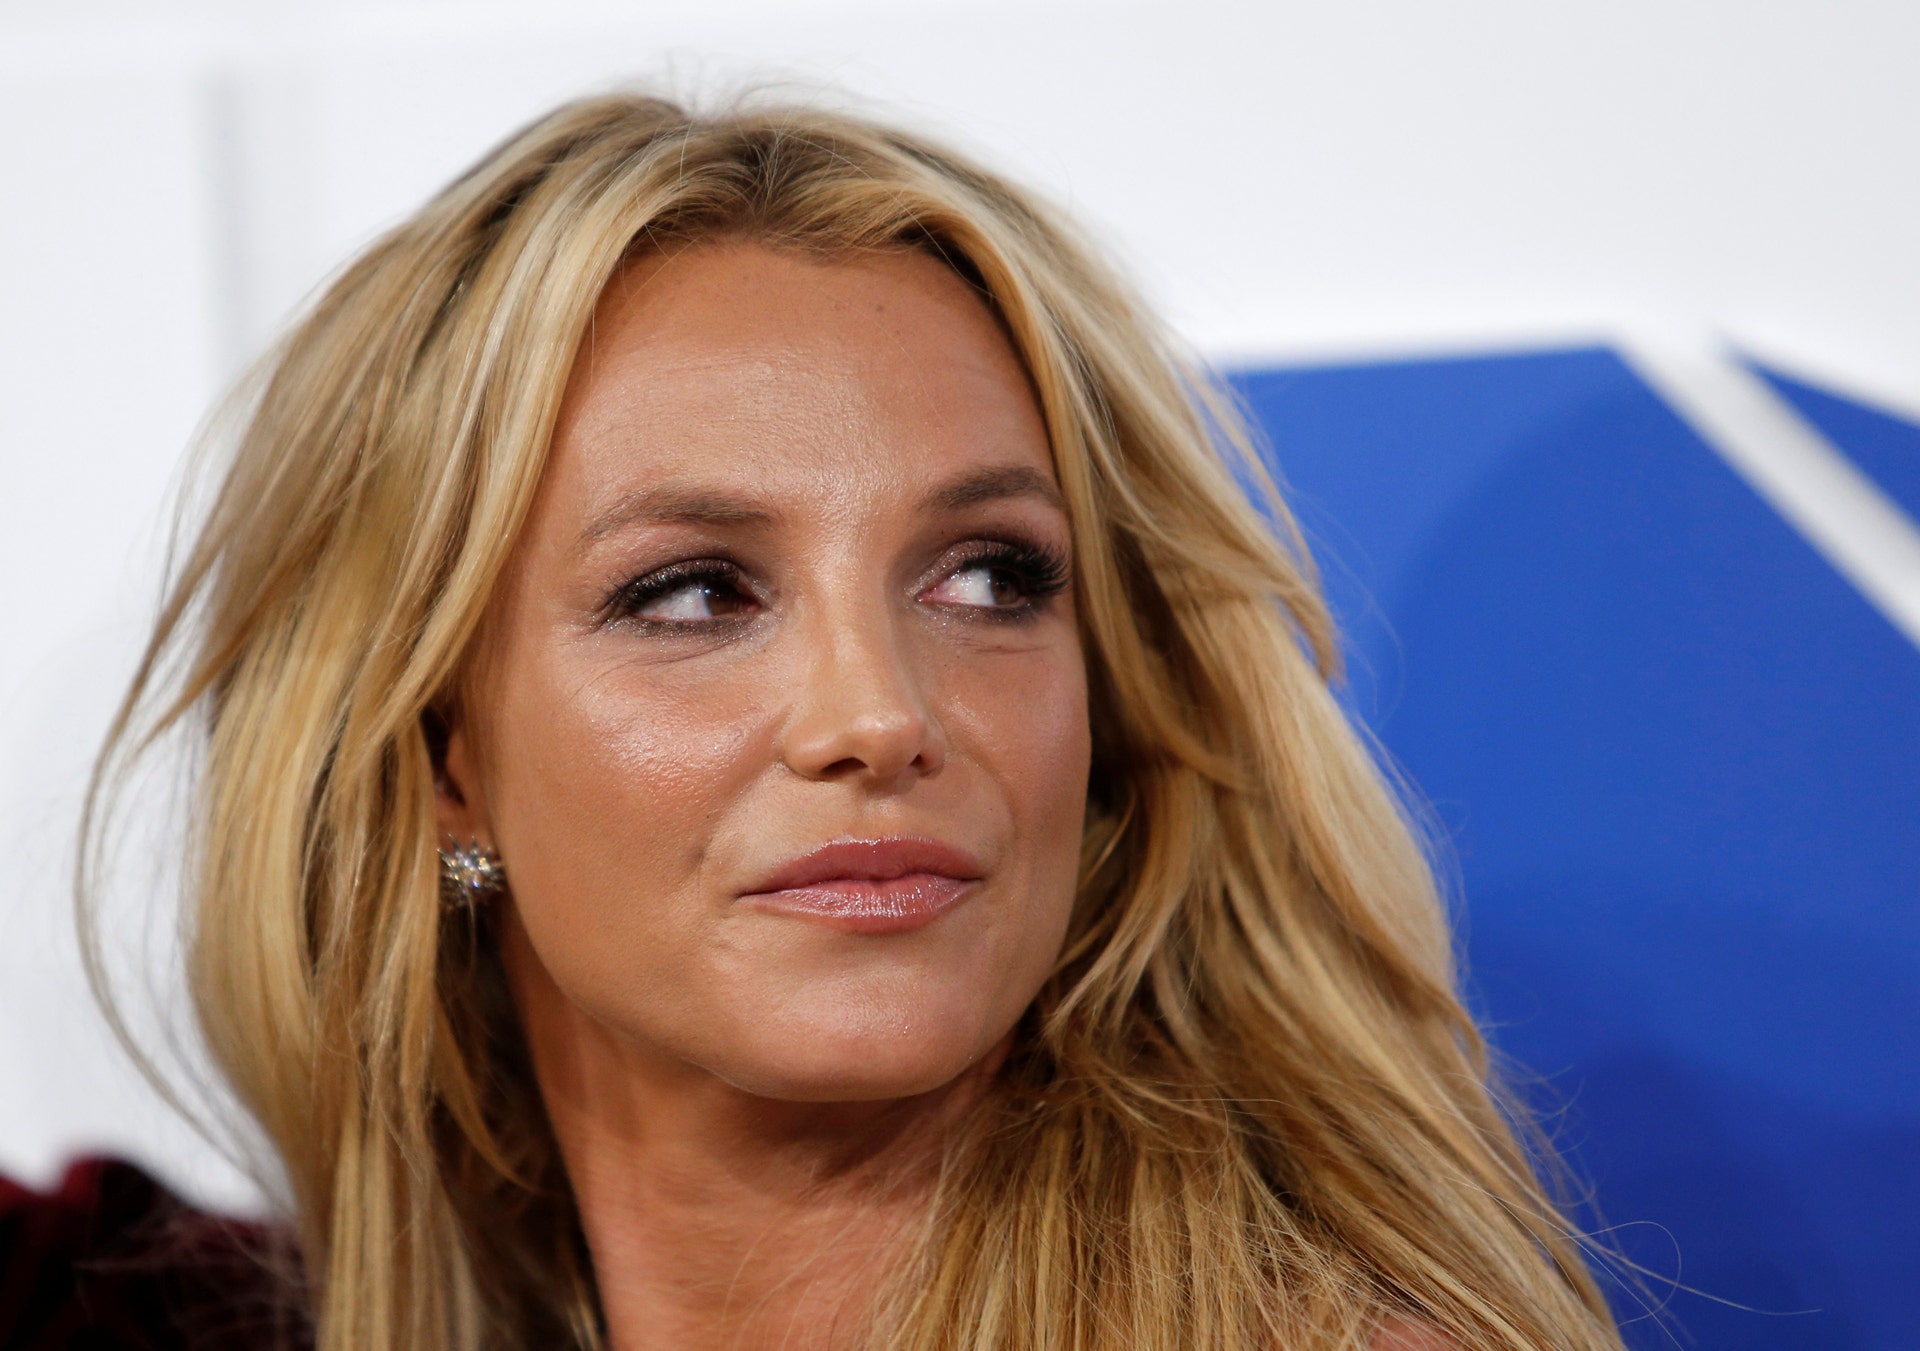 Britney Spears now feeling 'confident and strong' amid conservatorship battle: report